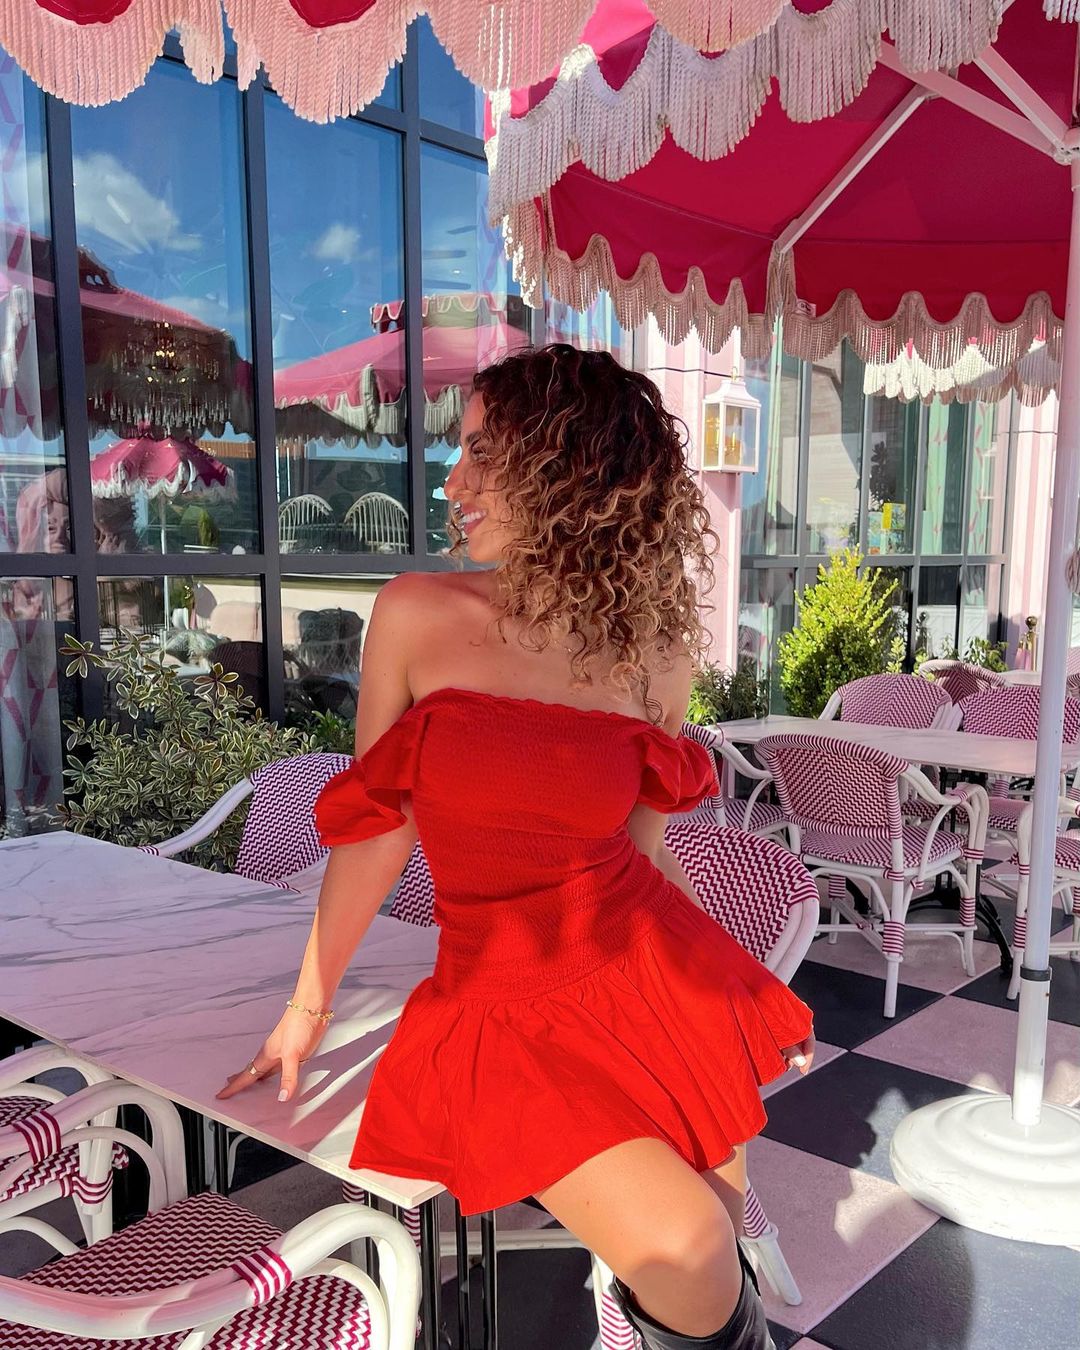 Gia shared snaps of herself in a red dress, similar to the one she sported during the 2023 NFL draft, prompting fans to wonder whether she was in Tennesse